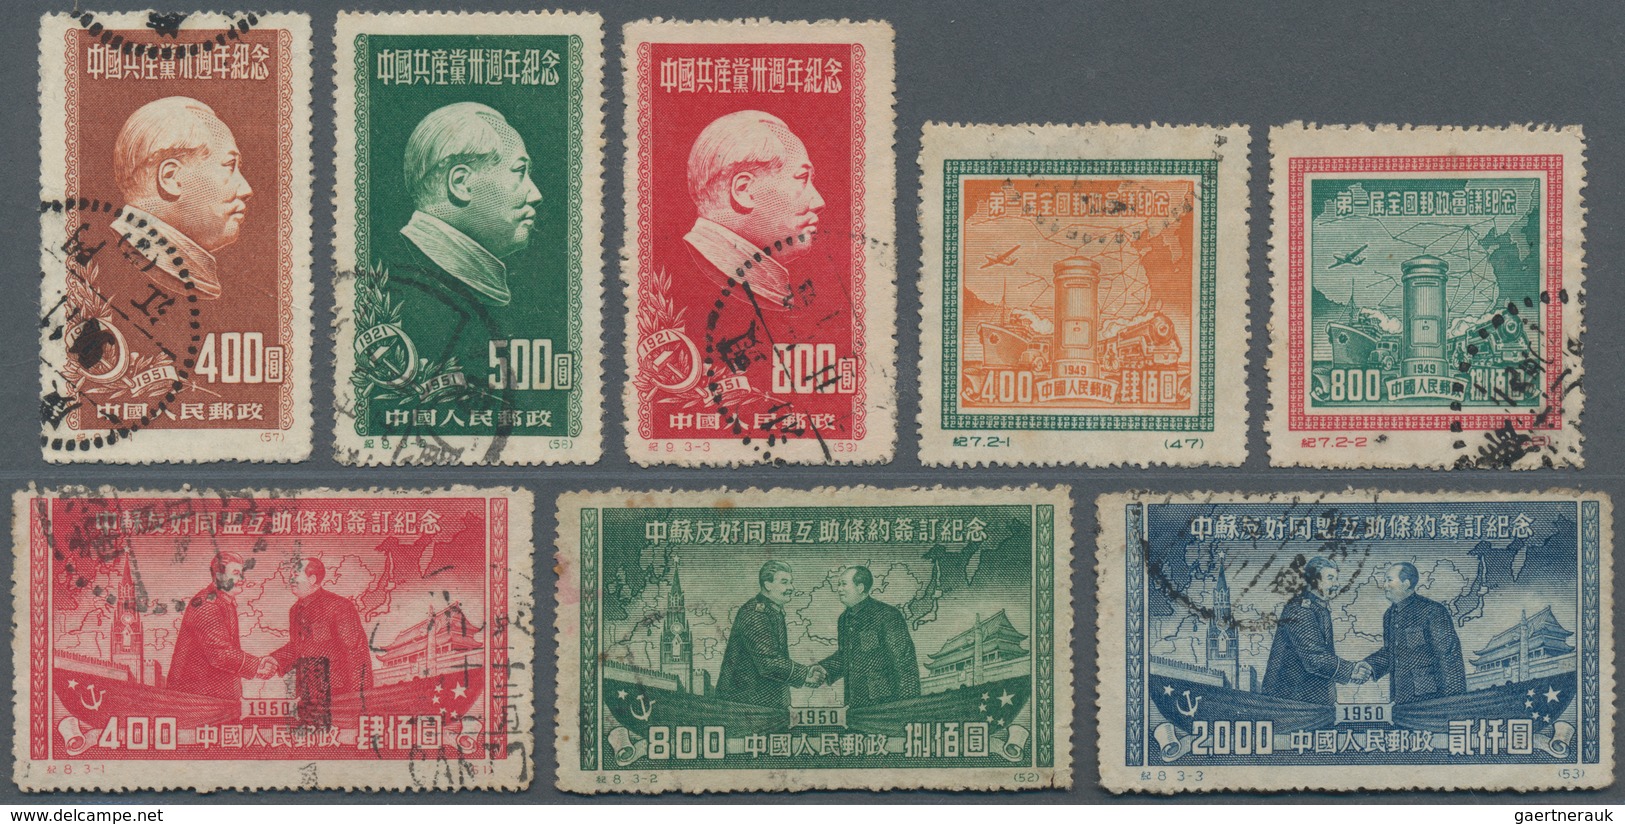 China: 1929/79, collection on stock cards ranging from the Republic, the Liberated Areas, and the Pe